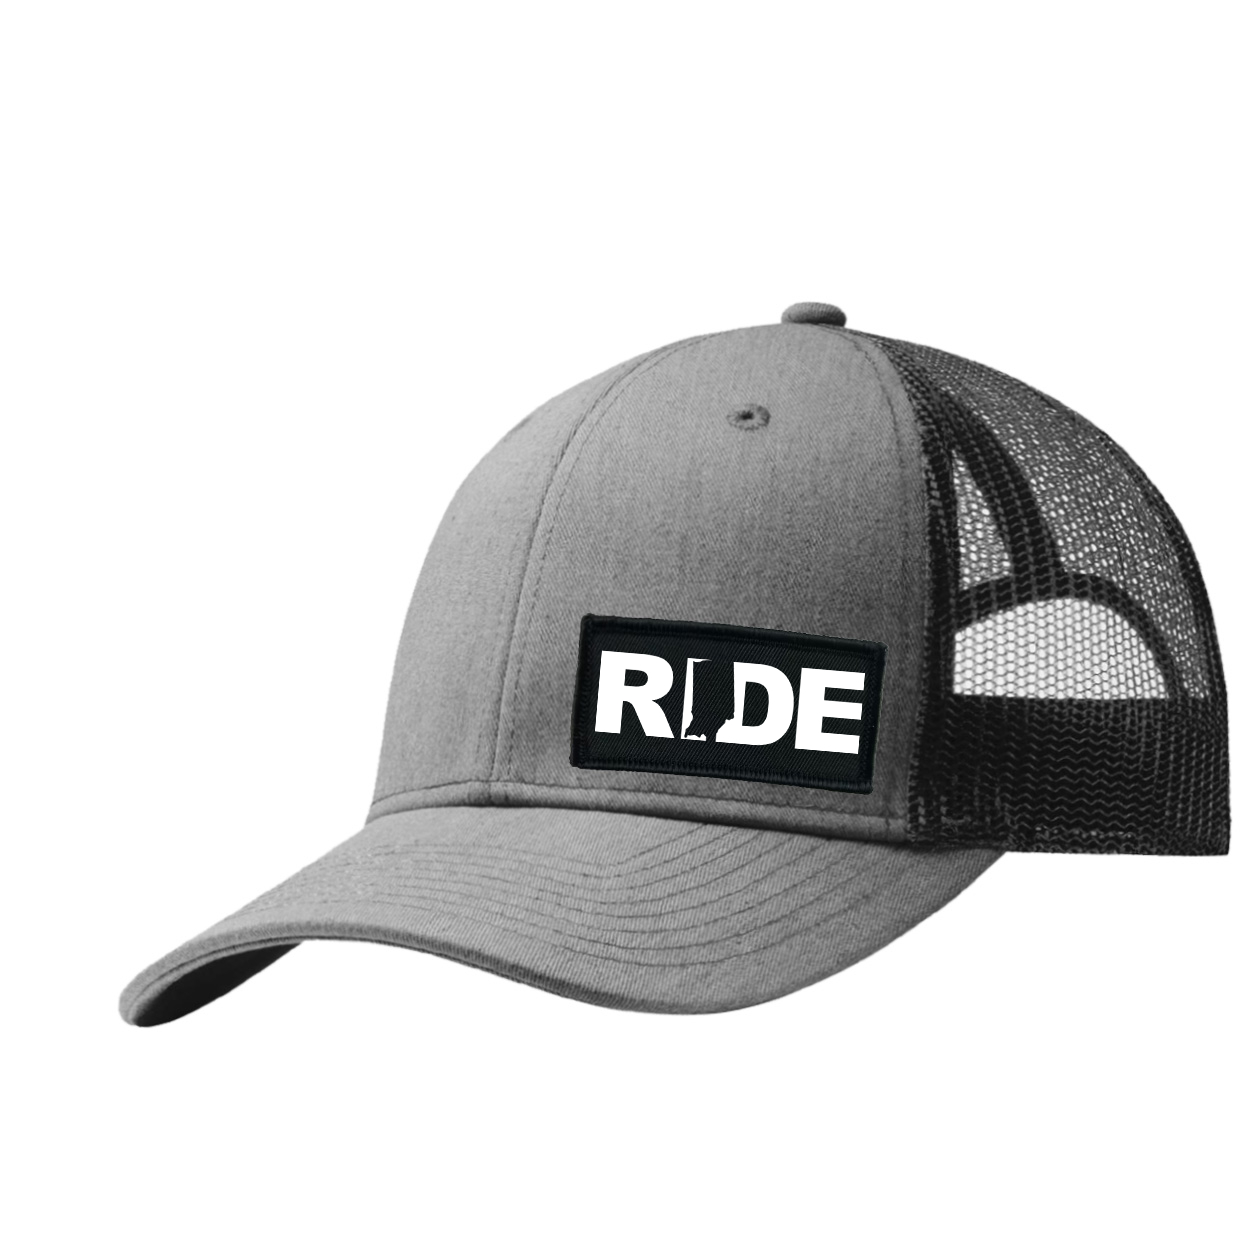 Ride Indiana Night Out Woven Patch Snapback Trucker Hat Heather Gray/Black (White Logo)